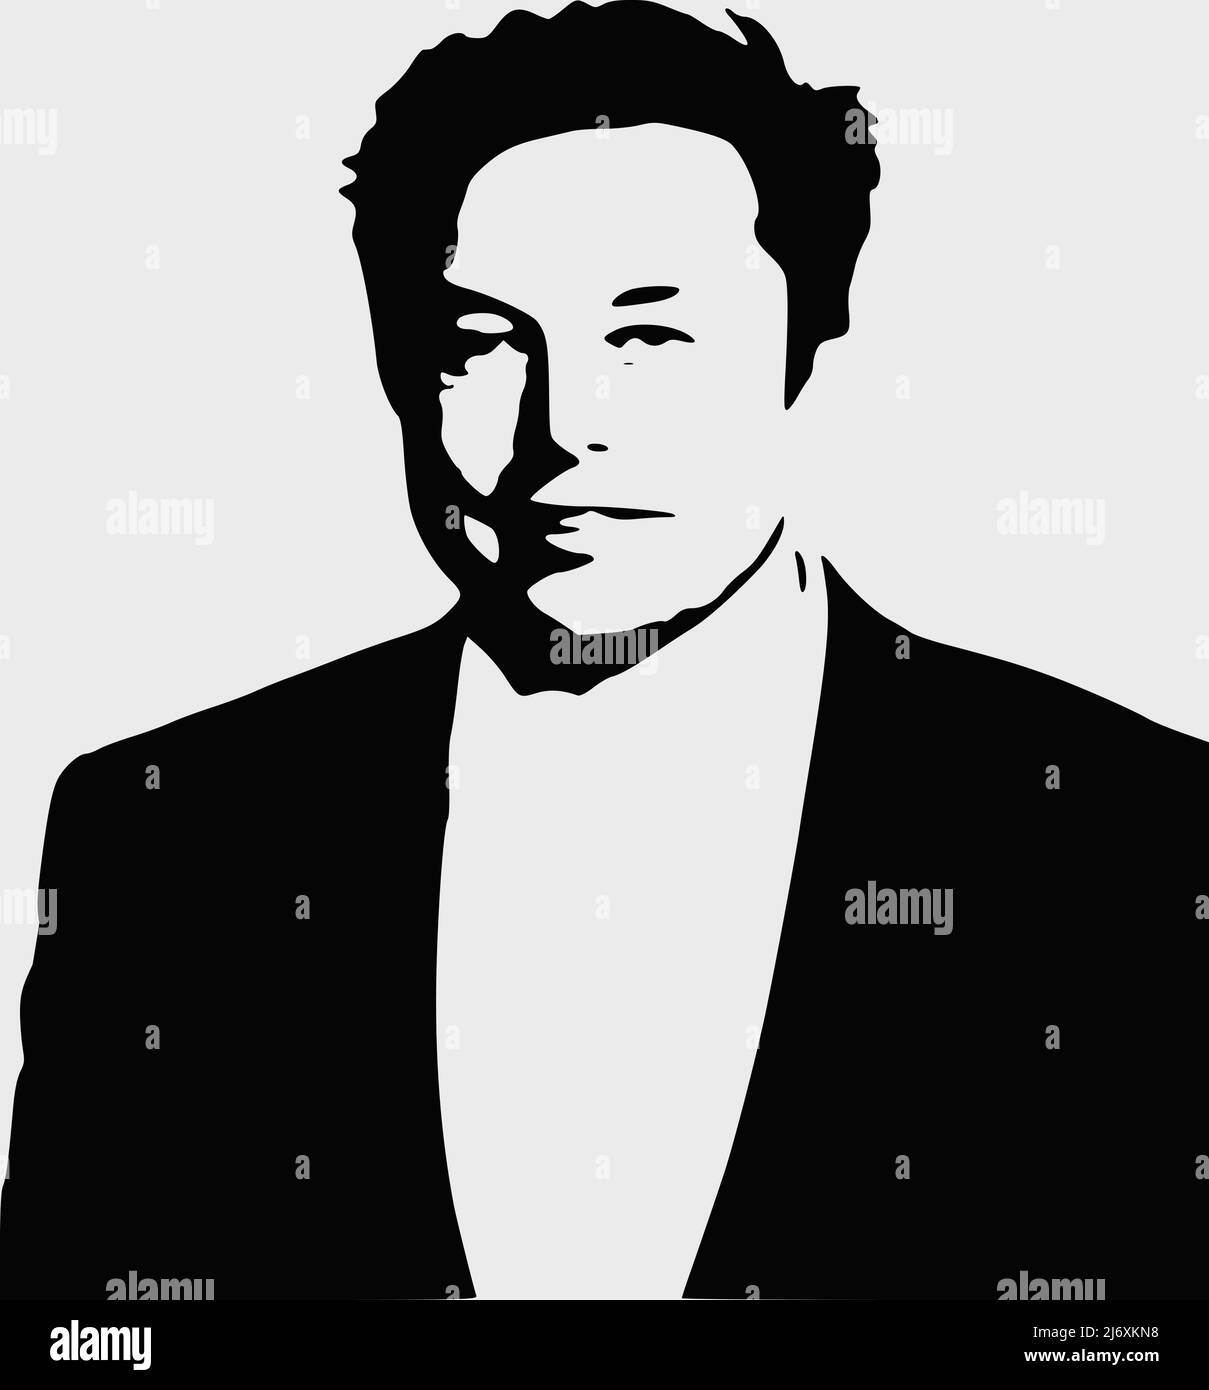 Vector illustration of Elon Musk with a transparent background. Stock Vector